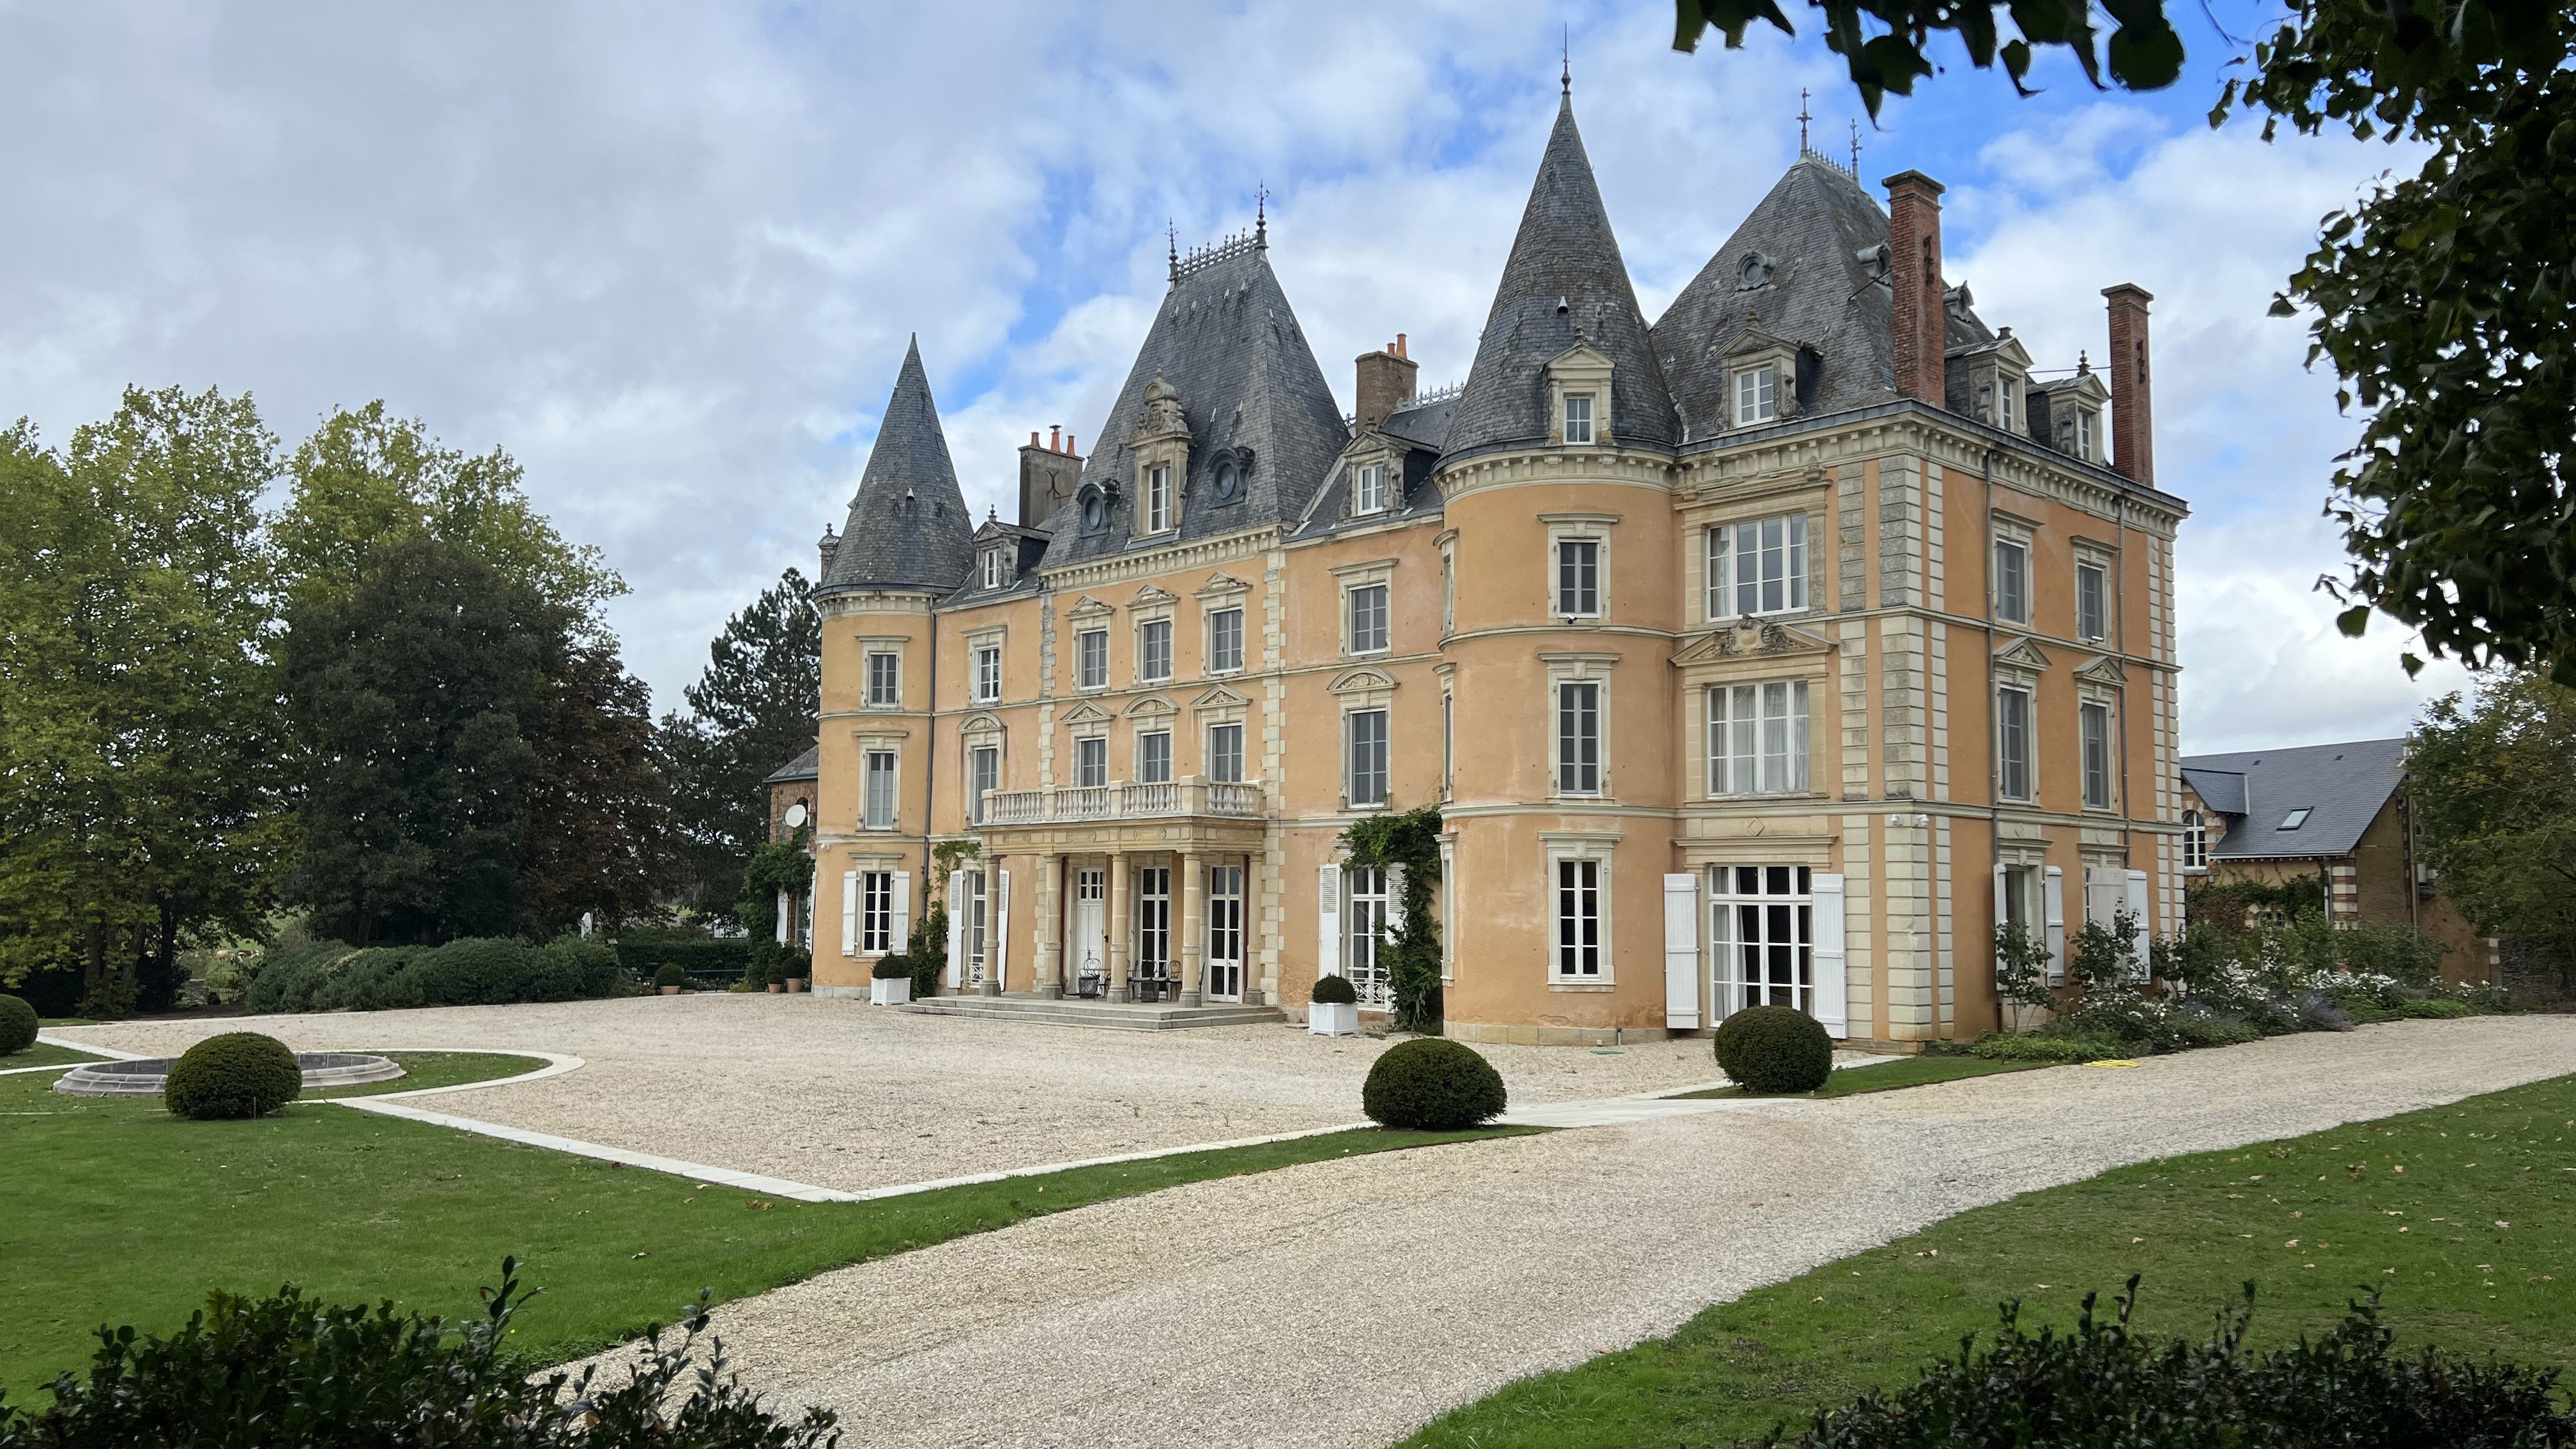 The chateau, just over an hour from Paris, which has been renovated and restored by its Australian owners.